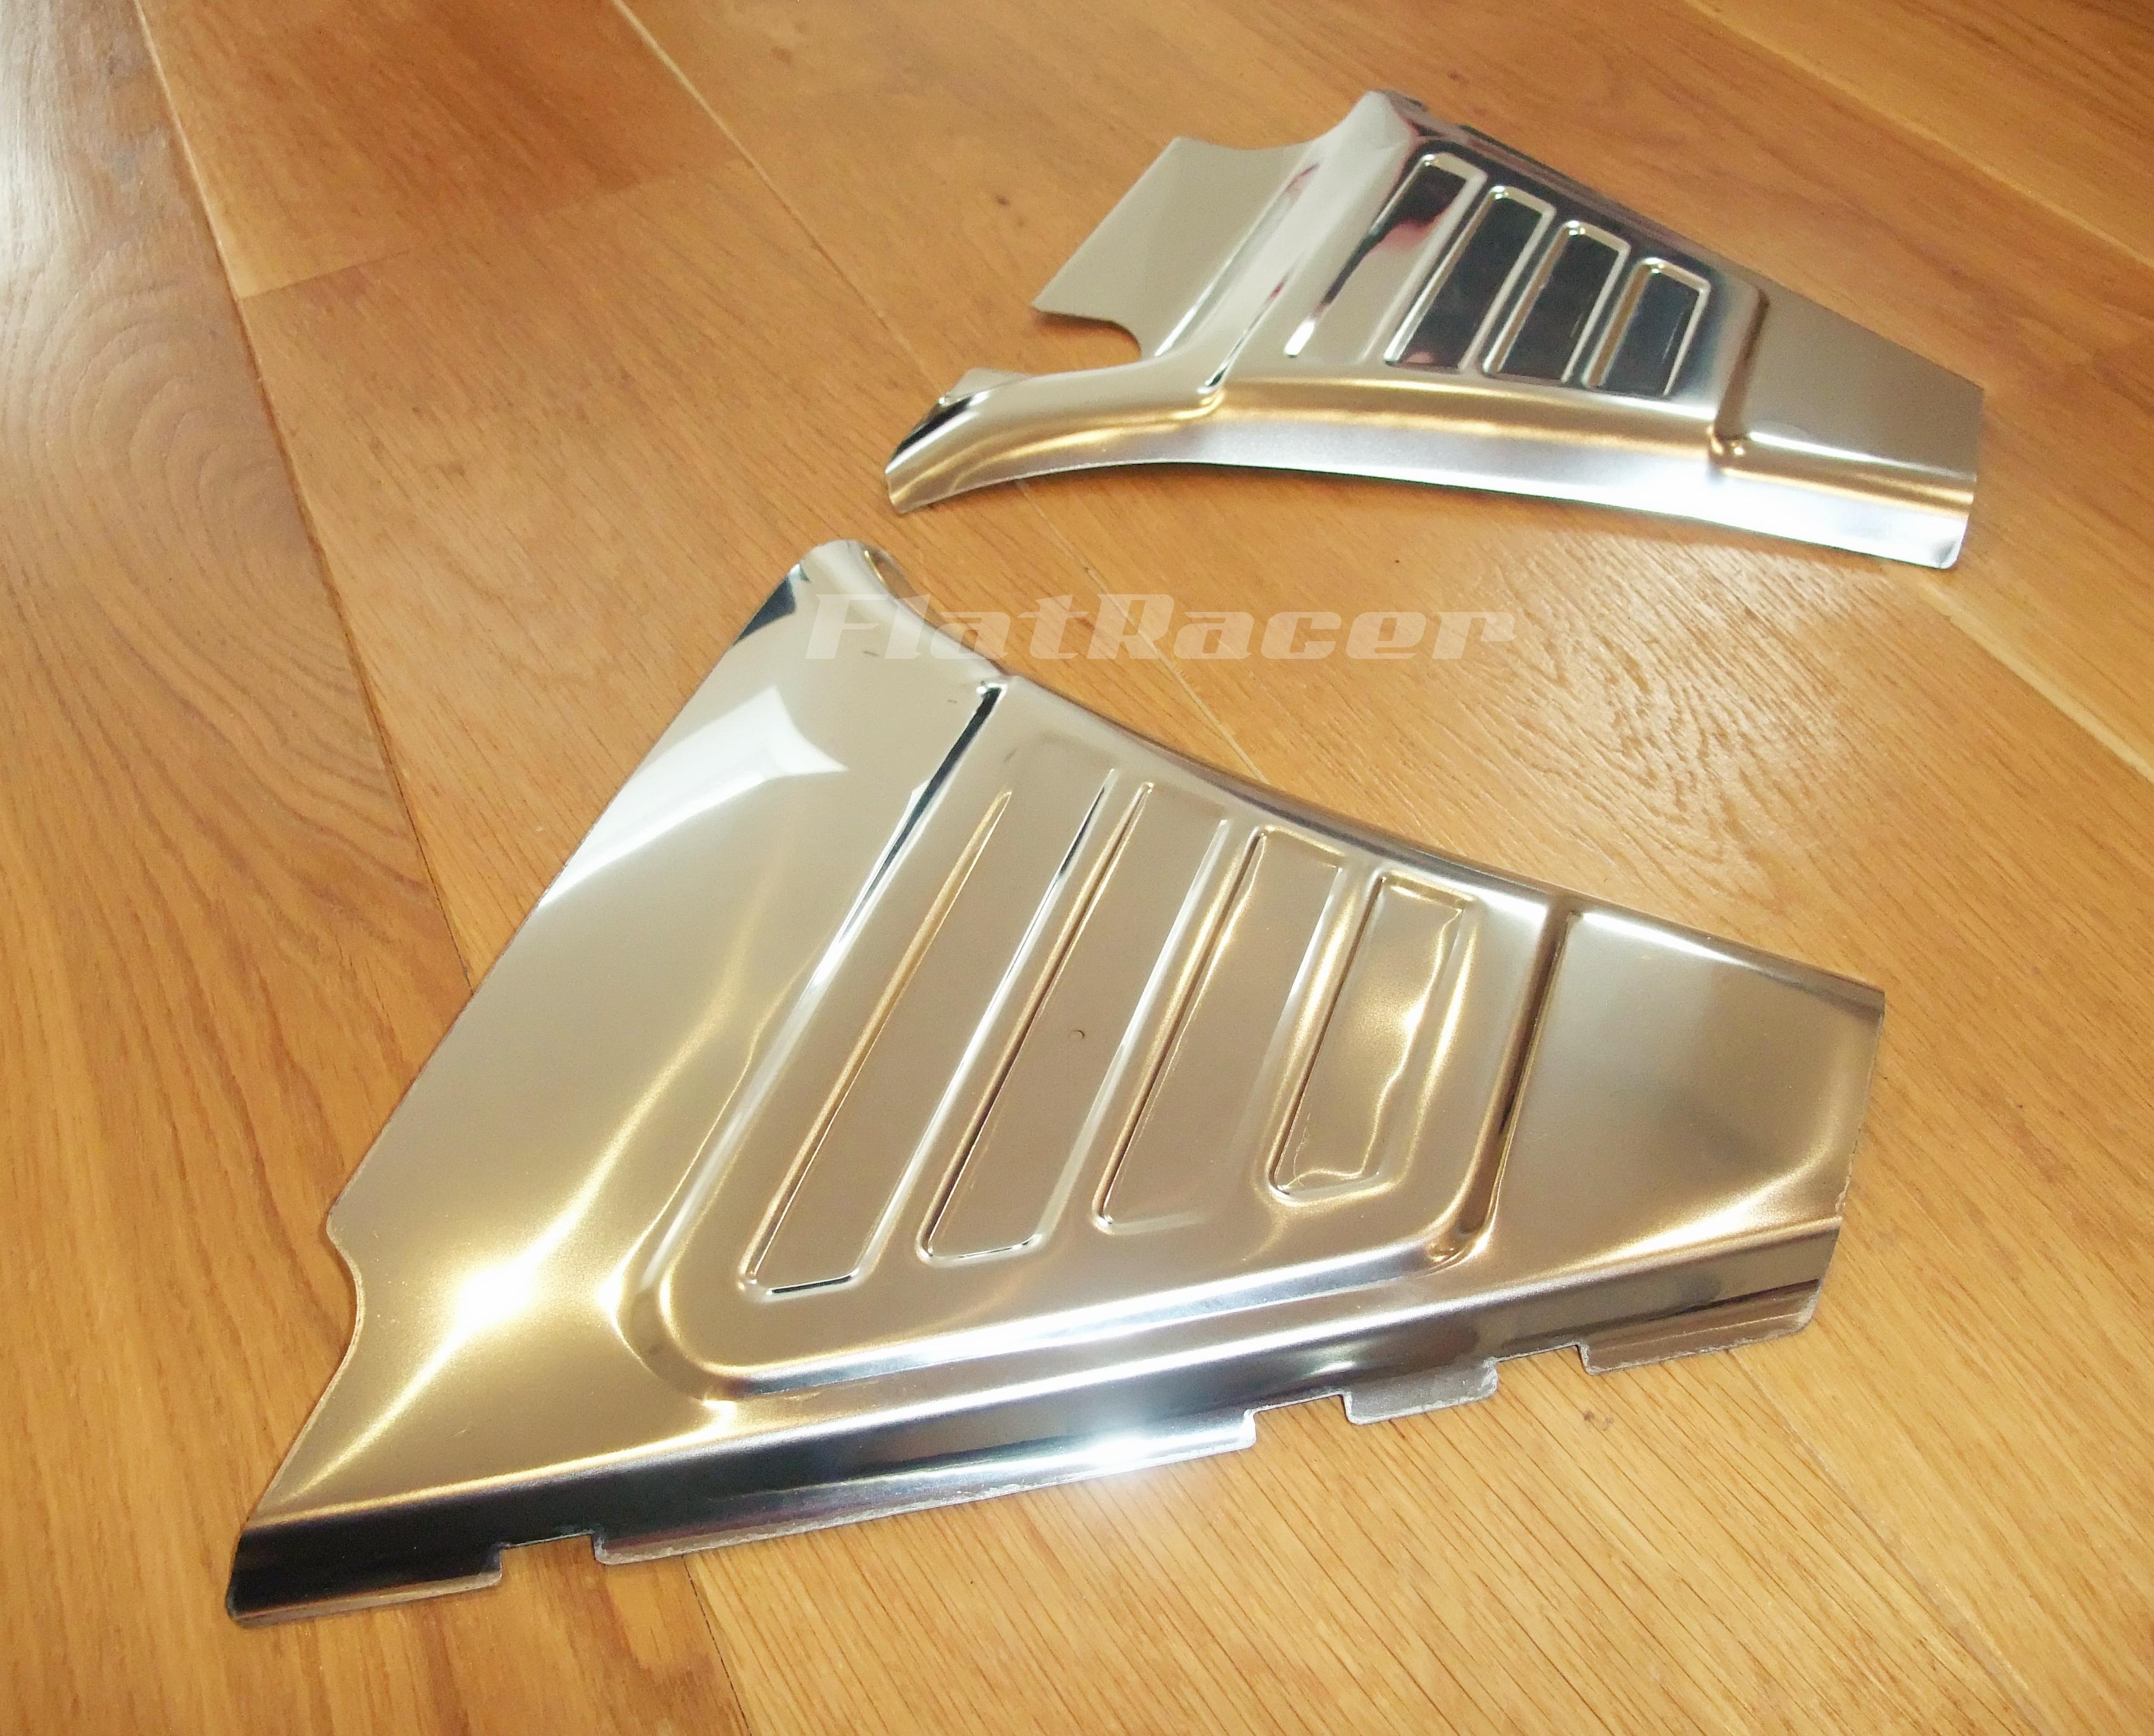 FlatRacer BMW /5 replica stainless steel battery covers / side panels (pair)